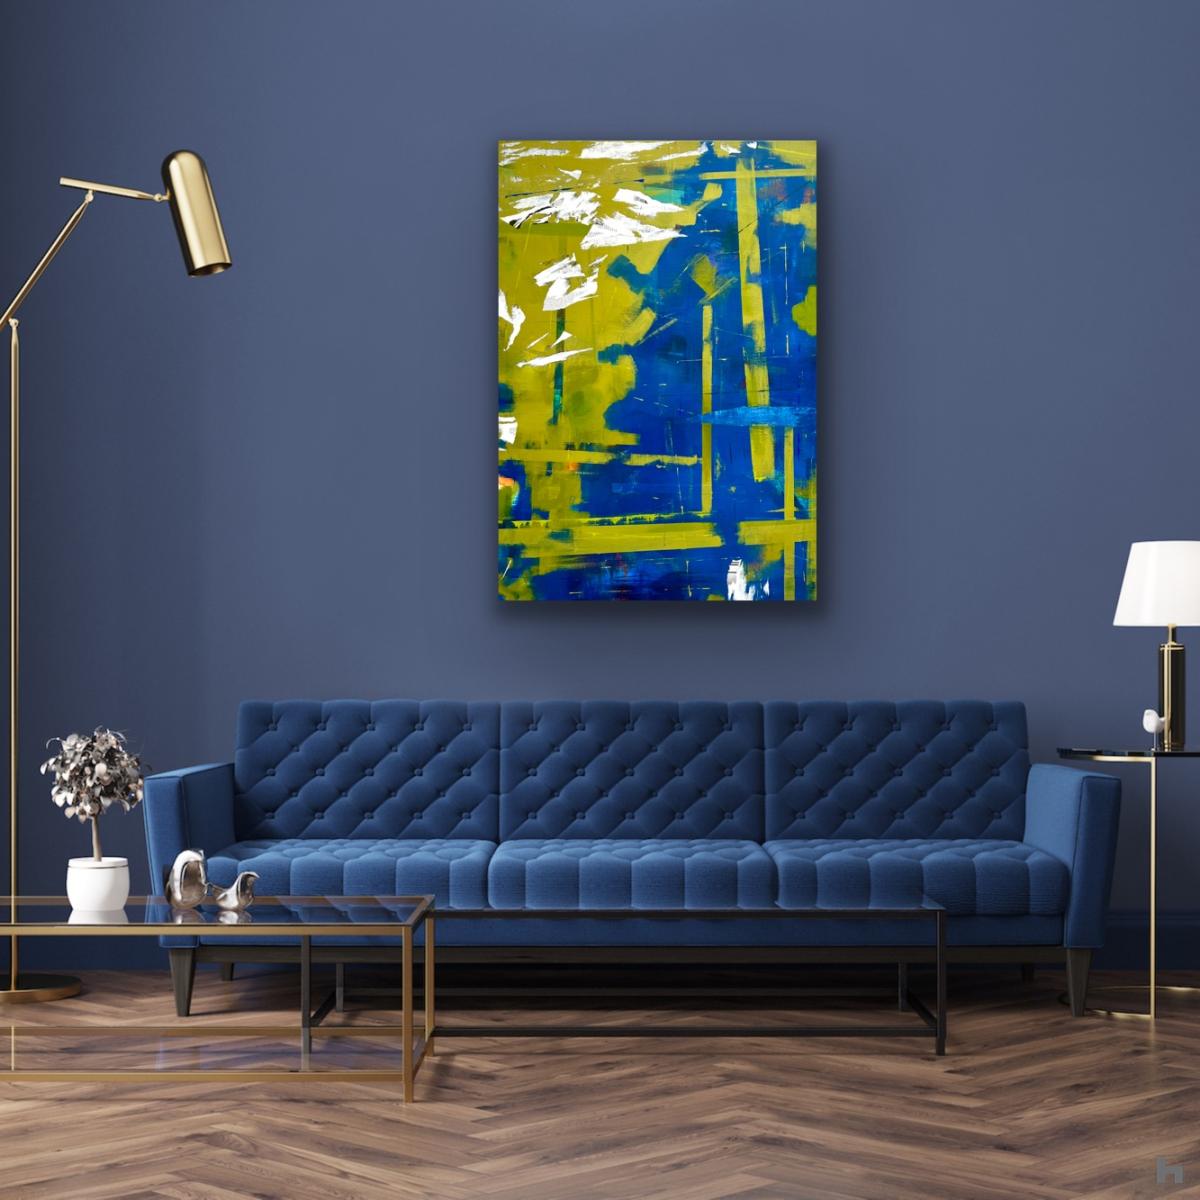 A blue and green abstract painting on a blue wall